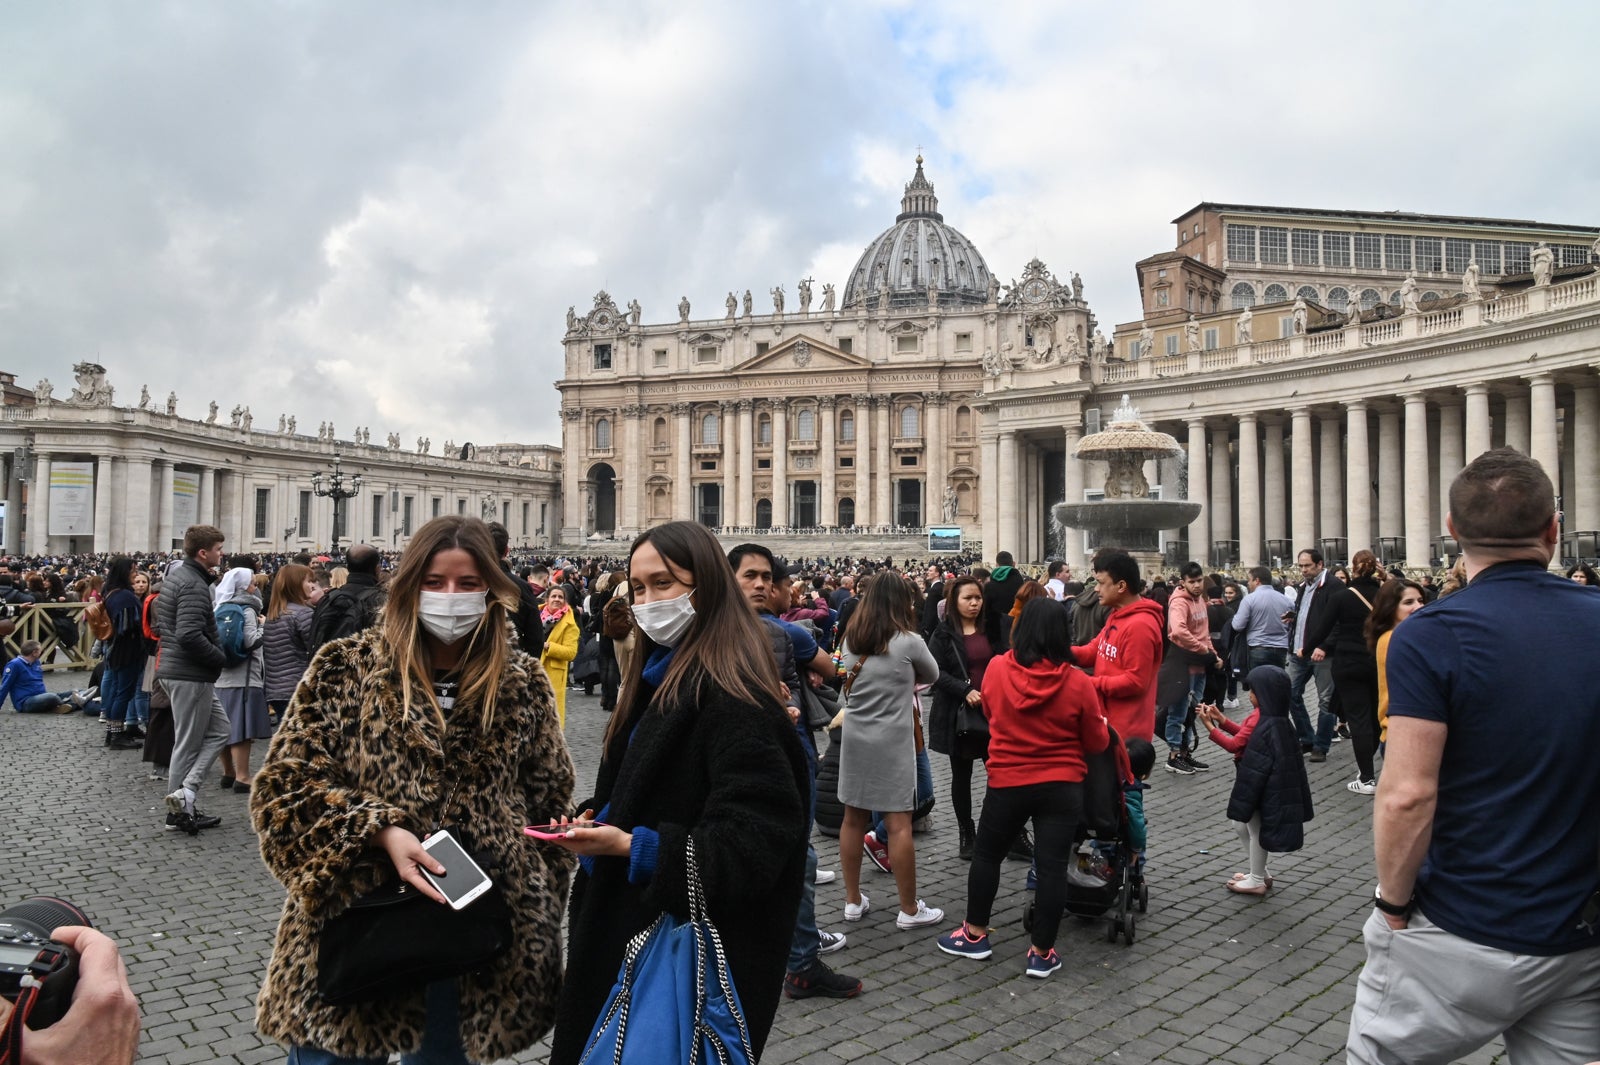 Is it safe to travel to Italy during the coronavirus outbreak?